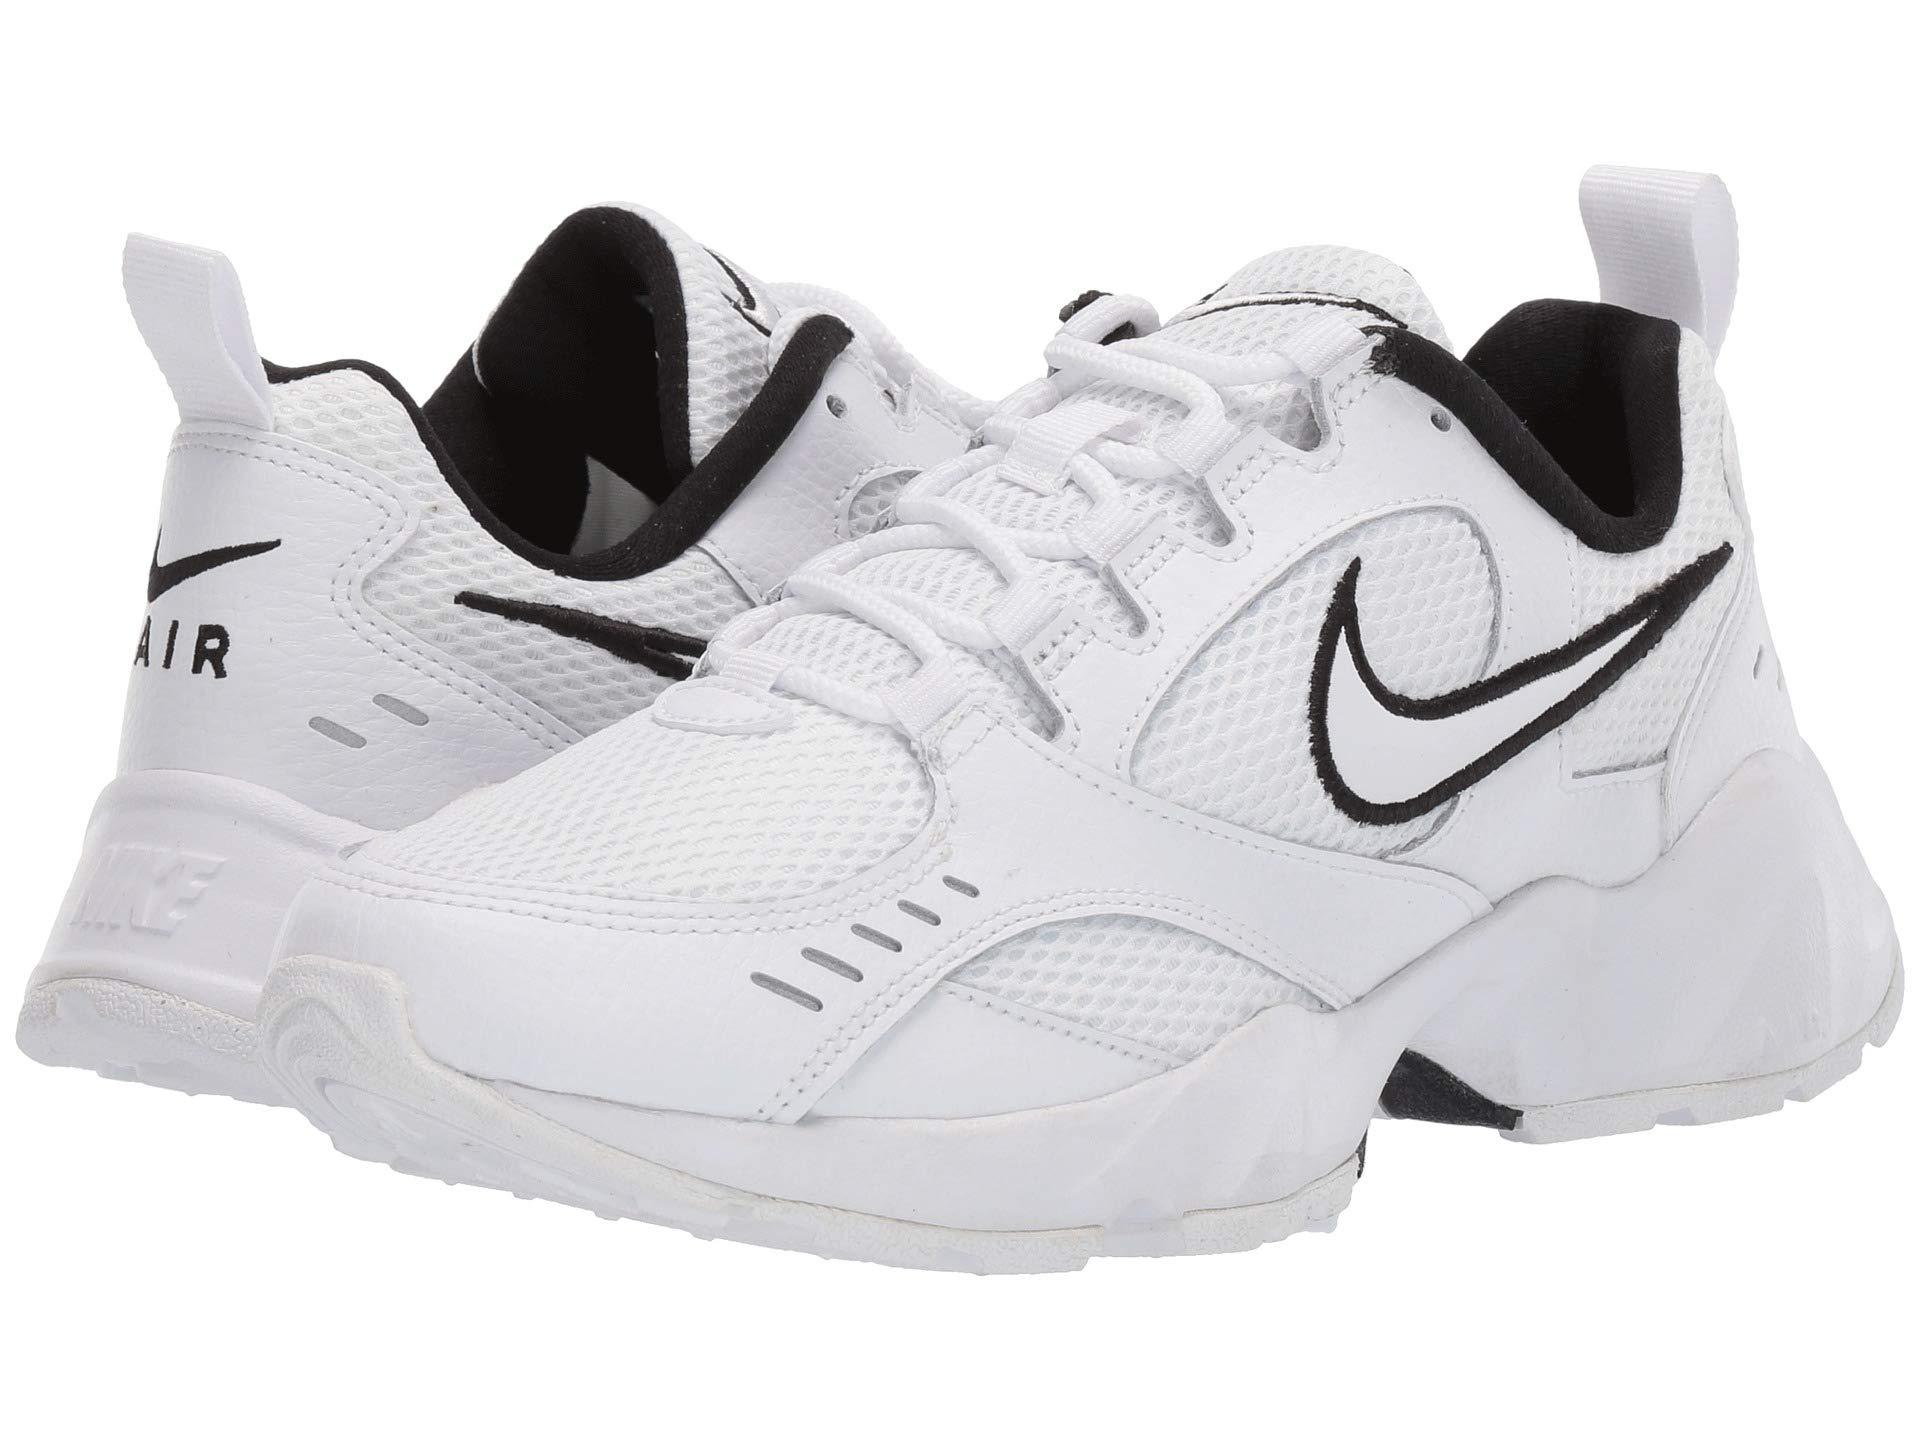 Nike Leather Air Heights in White/White/Black (White) | Lyst